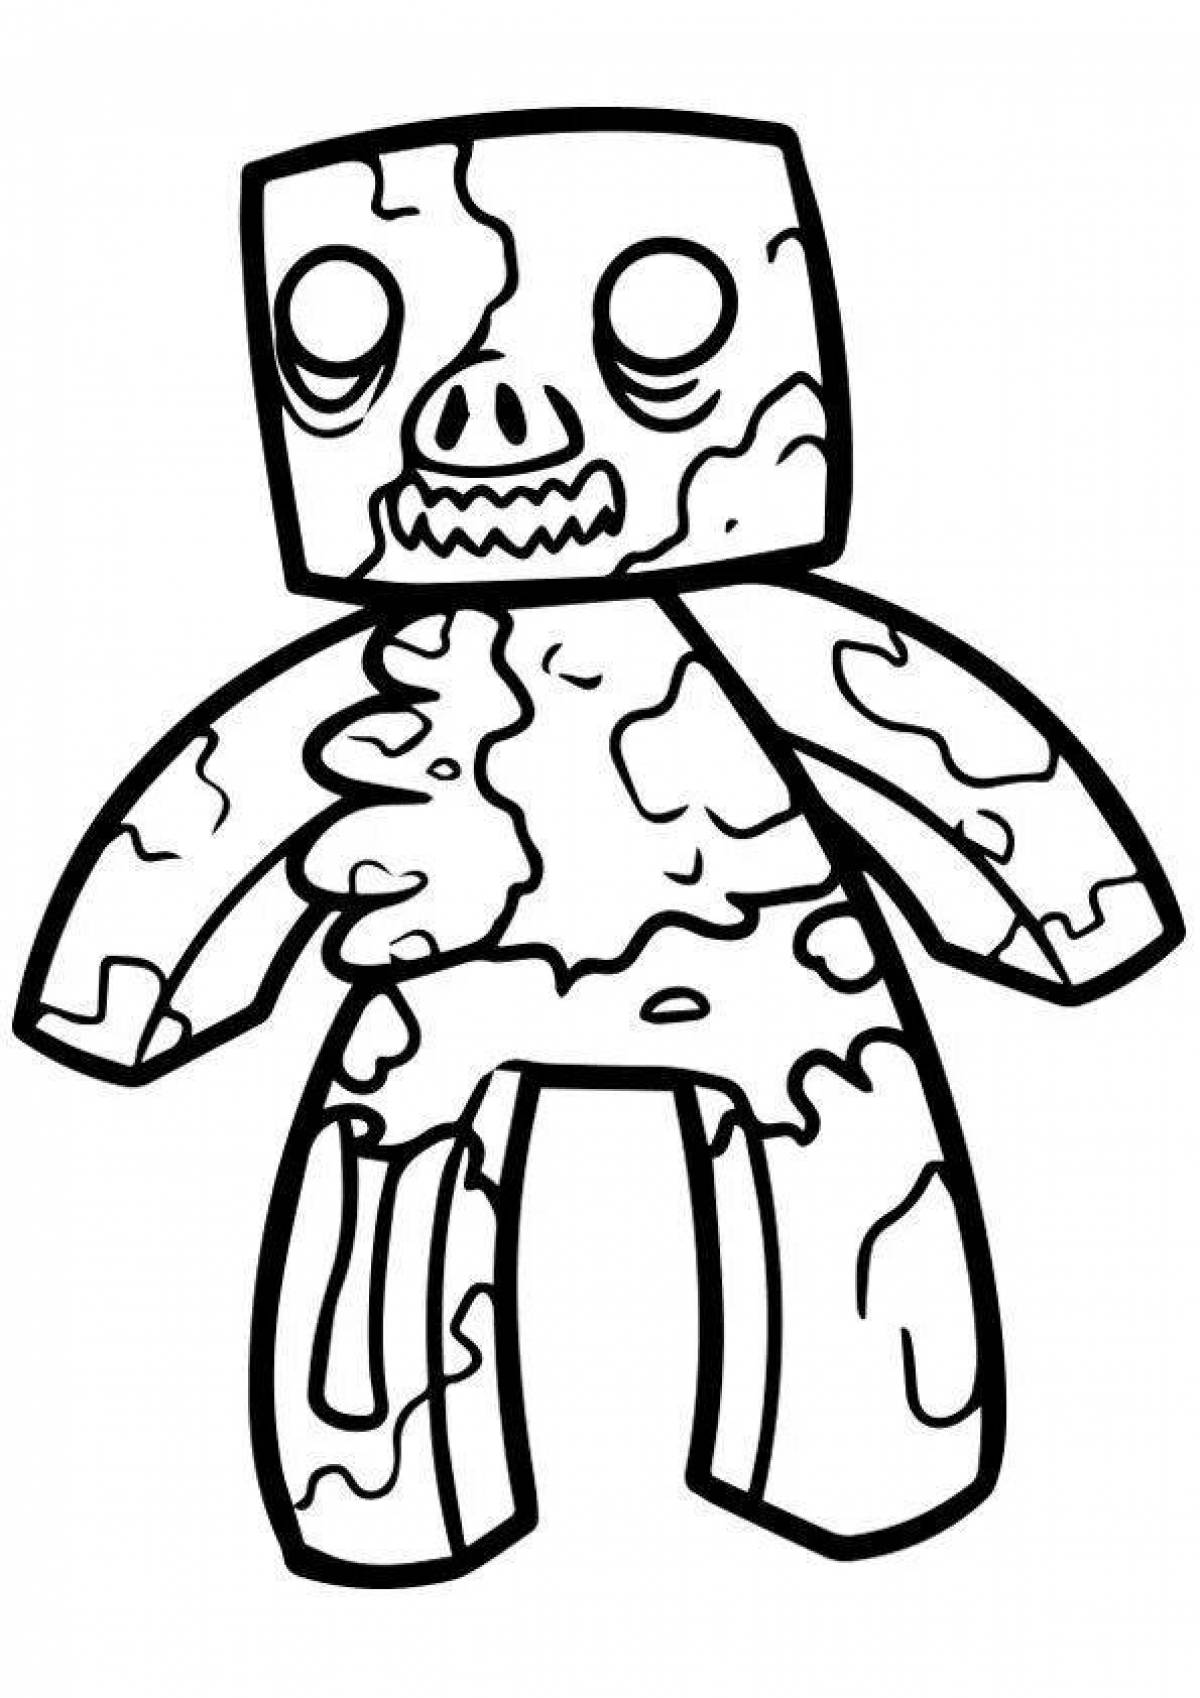 Colorful minecraft zombie coloring page